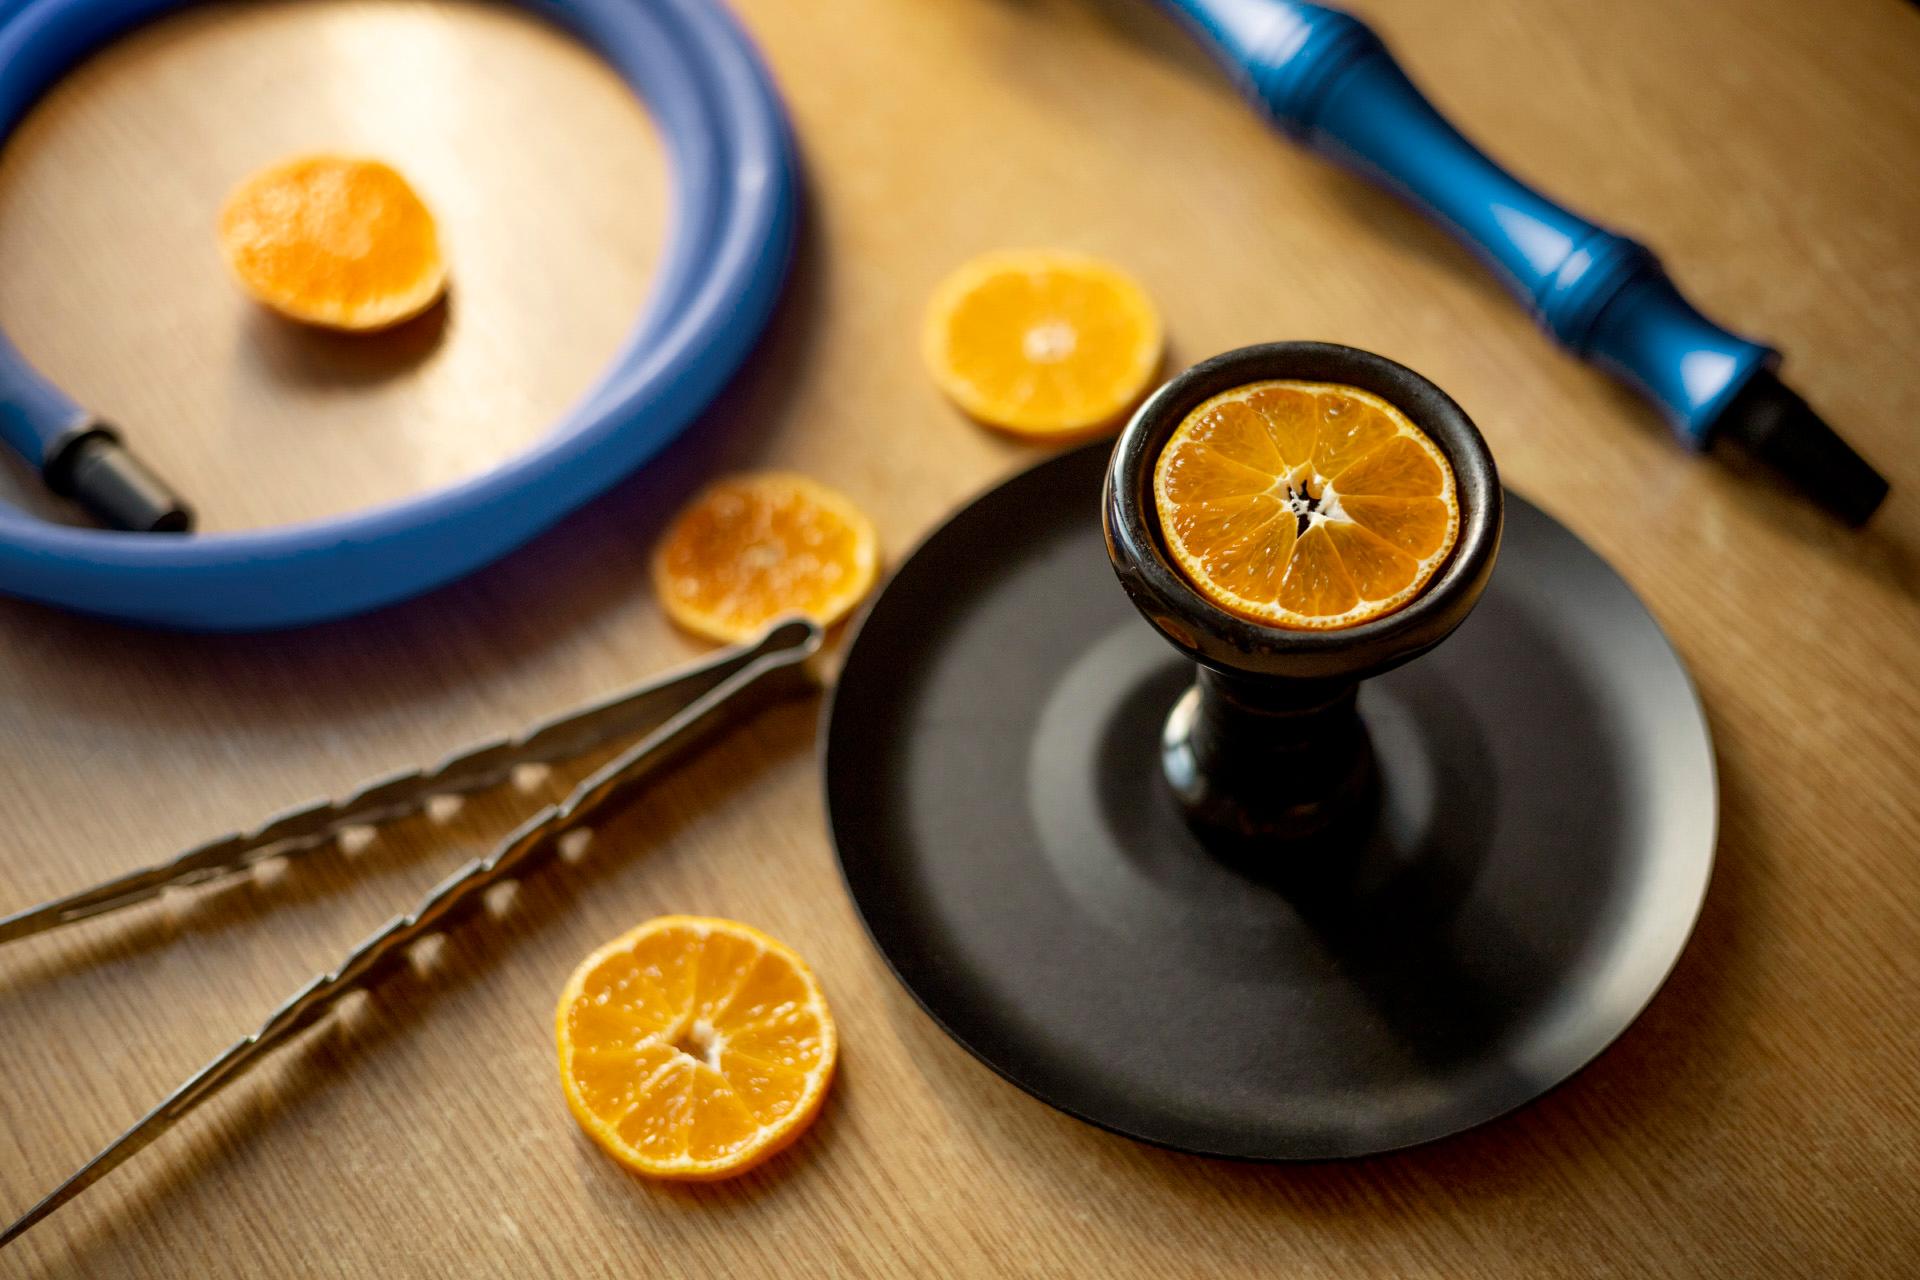 Hookah and orange slices standing on a wooden table